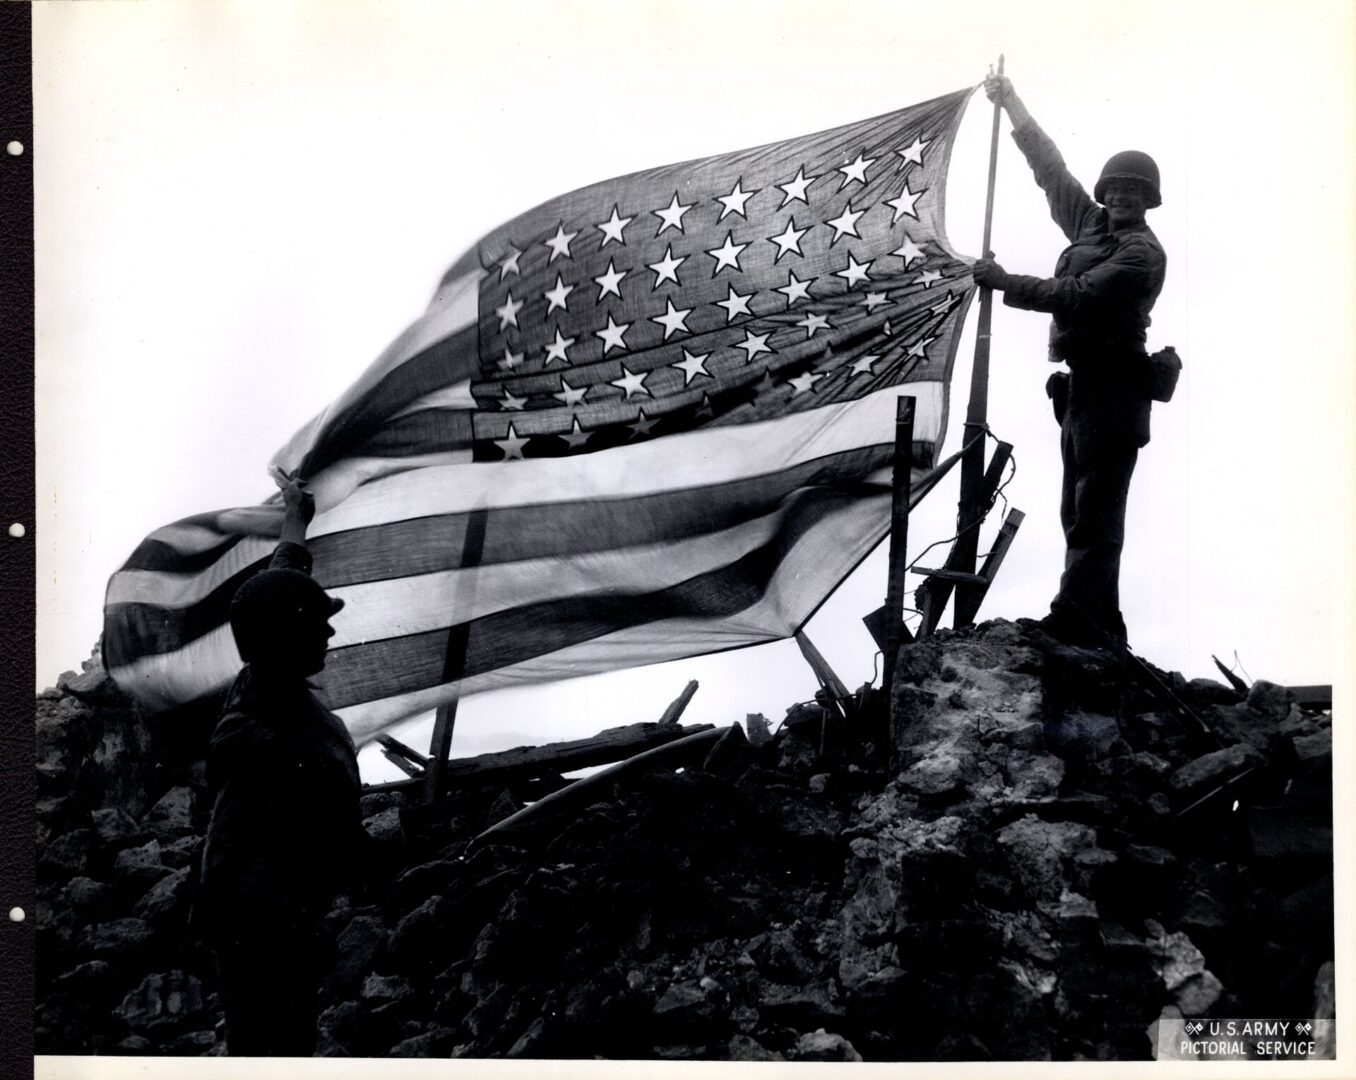 Two American soldiers holding up the American flag